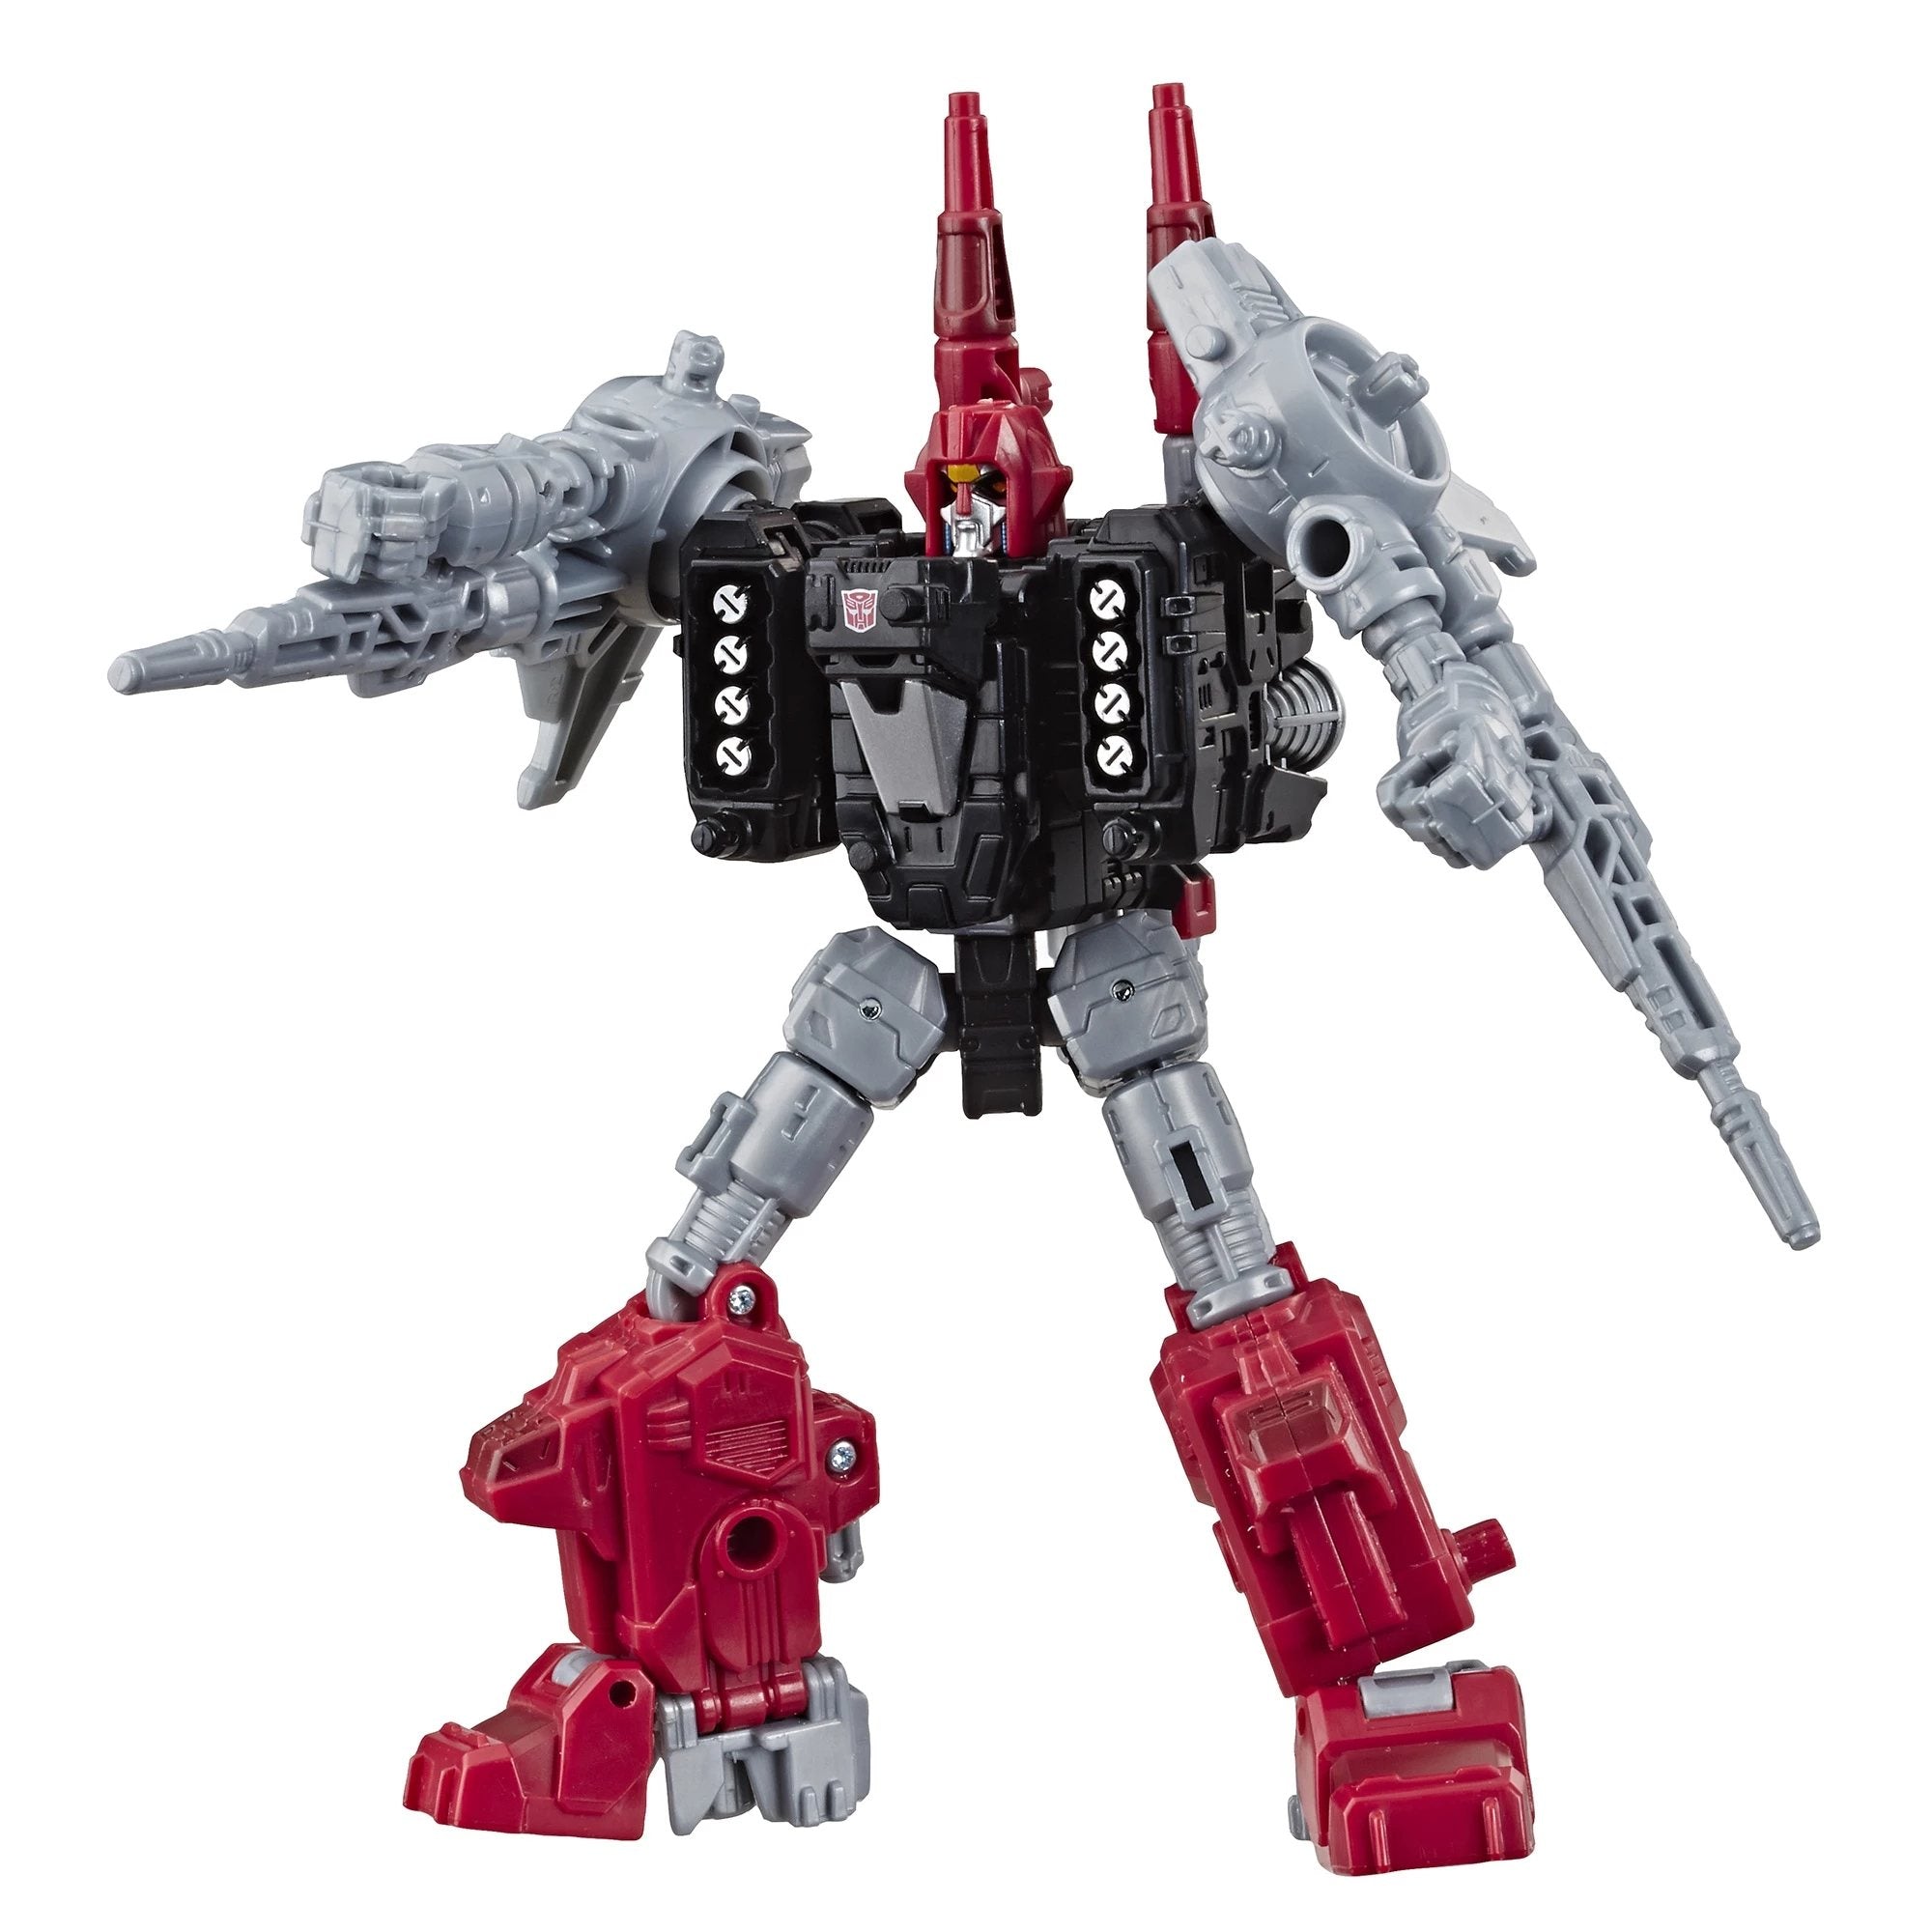 Transformers Generations Selects WFC-GS04 Deluxe Powerdasher Cromar Action Figure